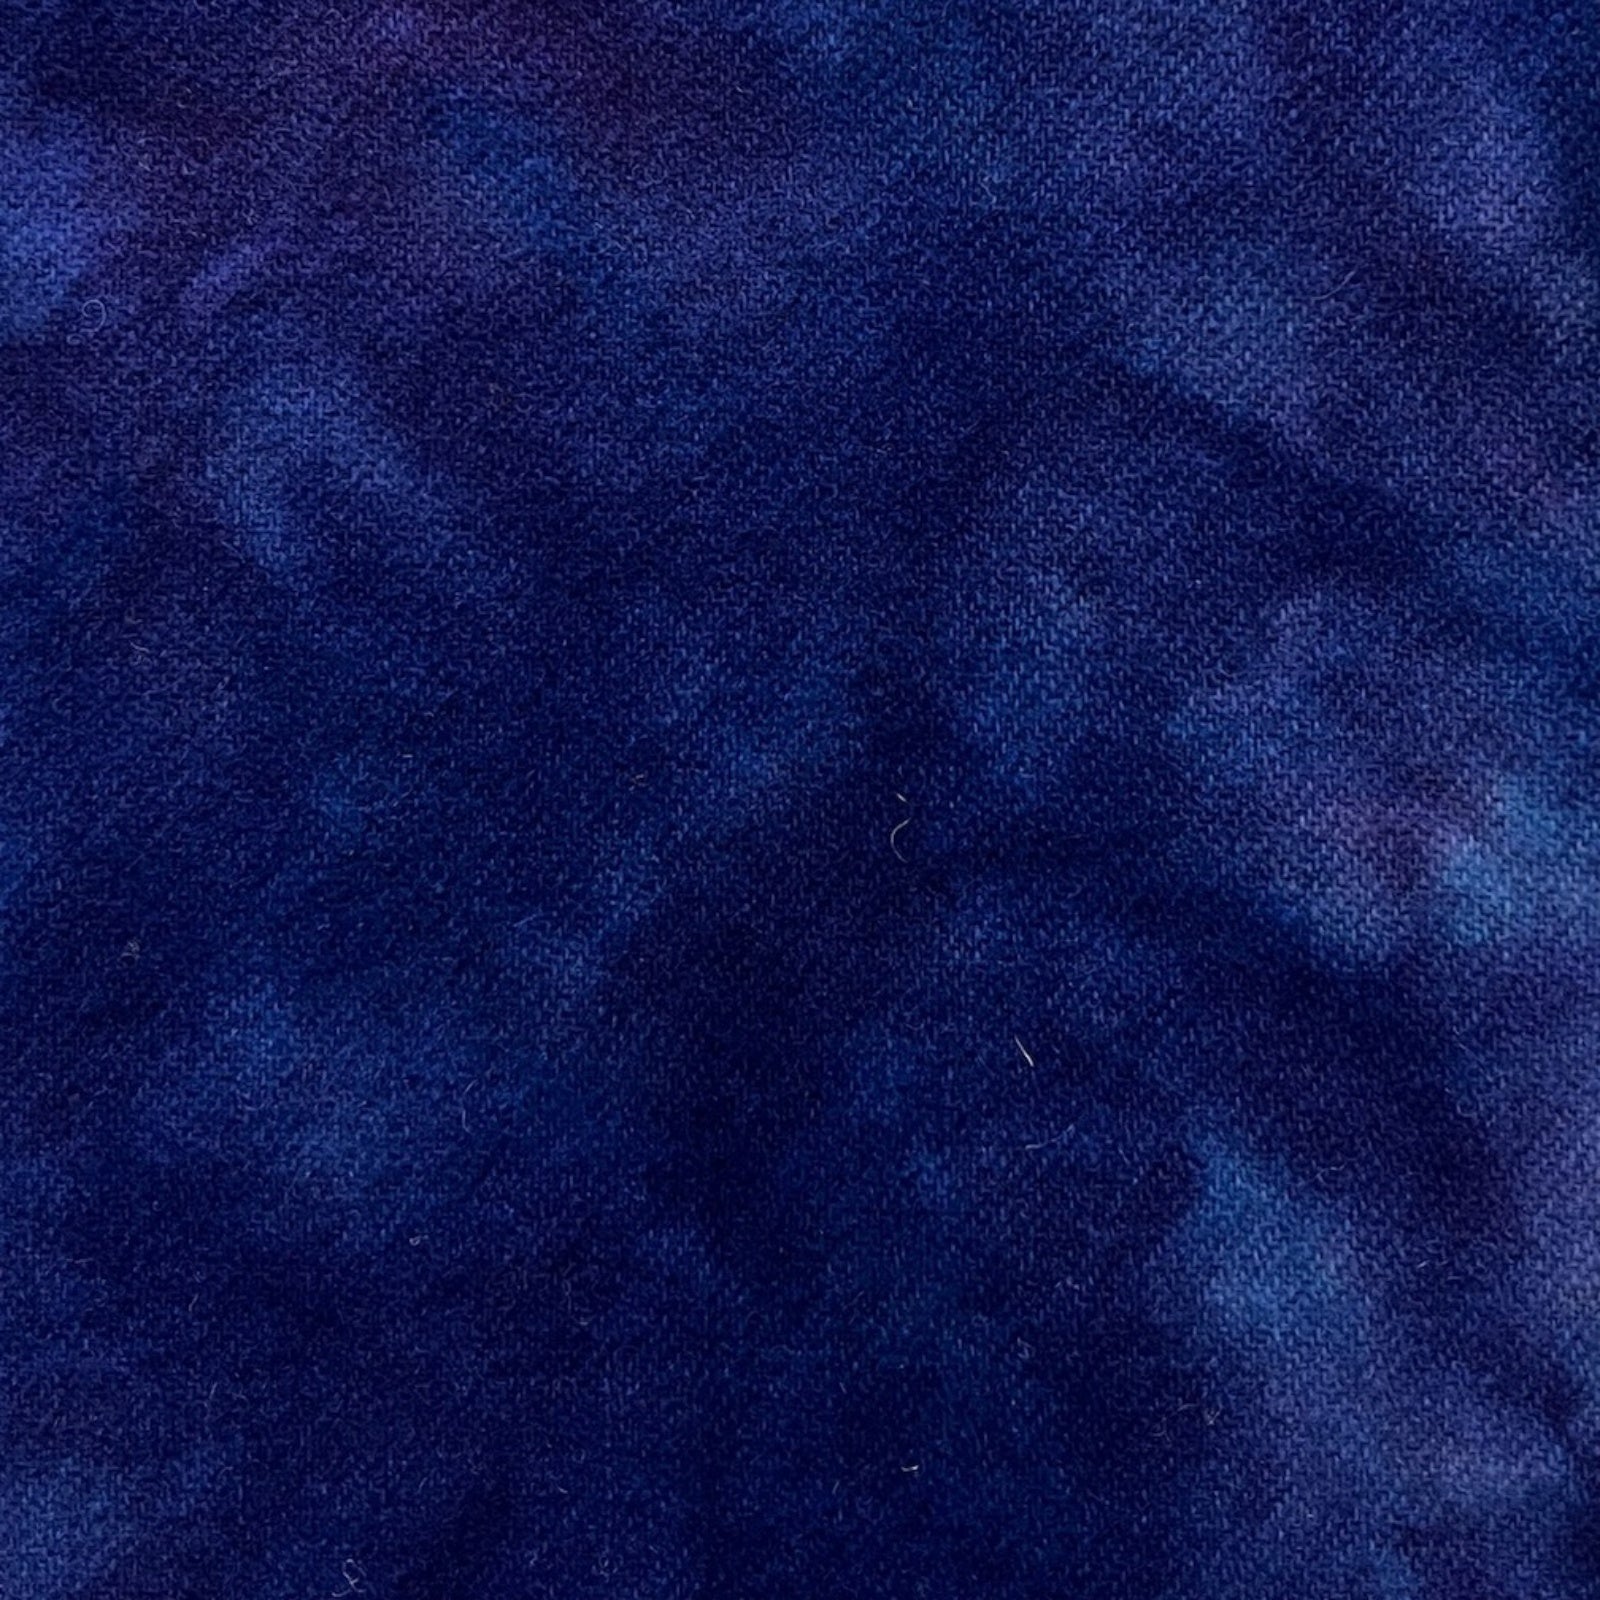 Midnight - Colorama Hand Dyed Wool - Offered by HoneyBee Hive Rug Hooking